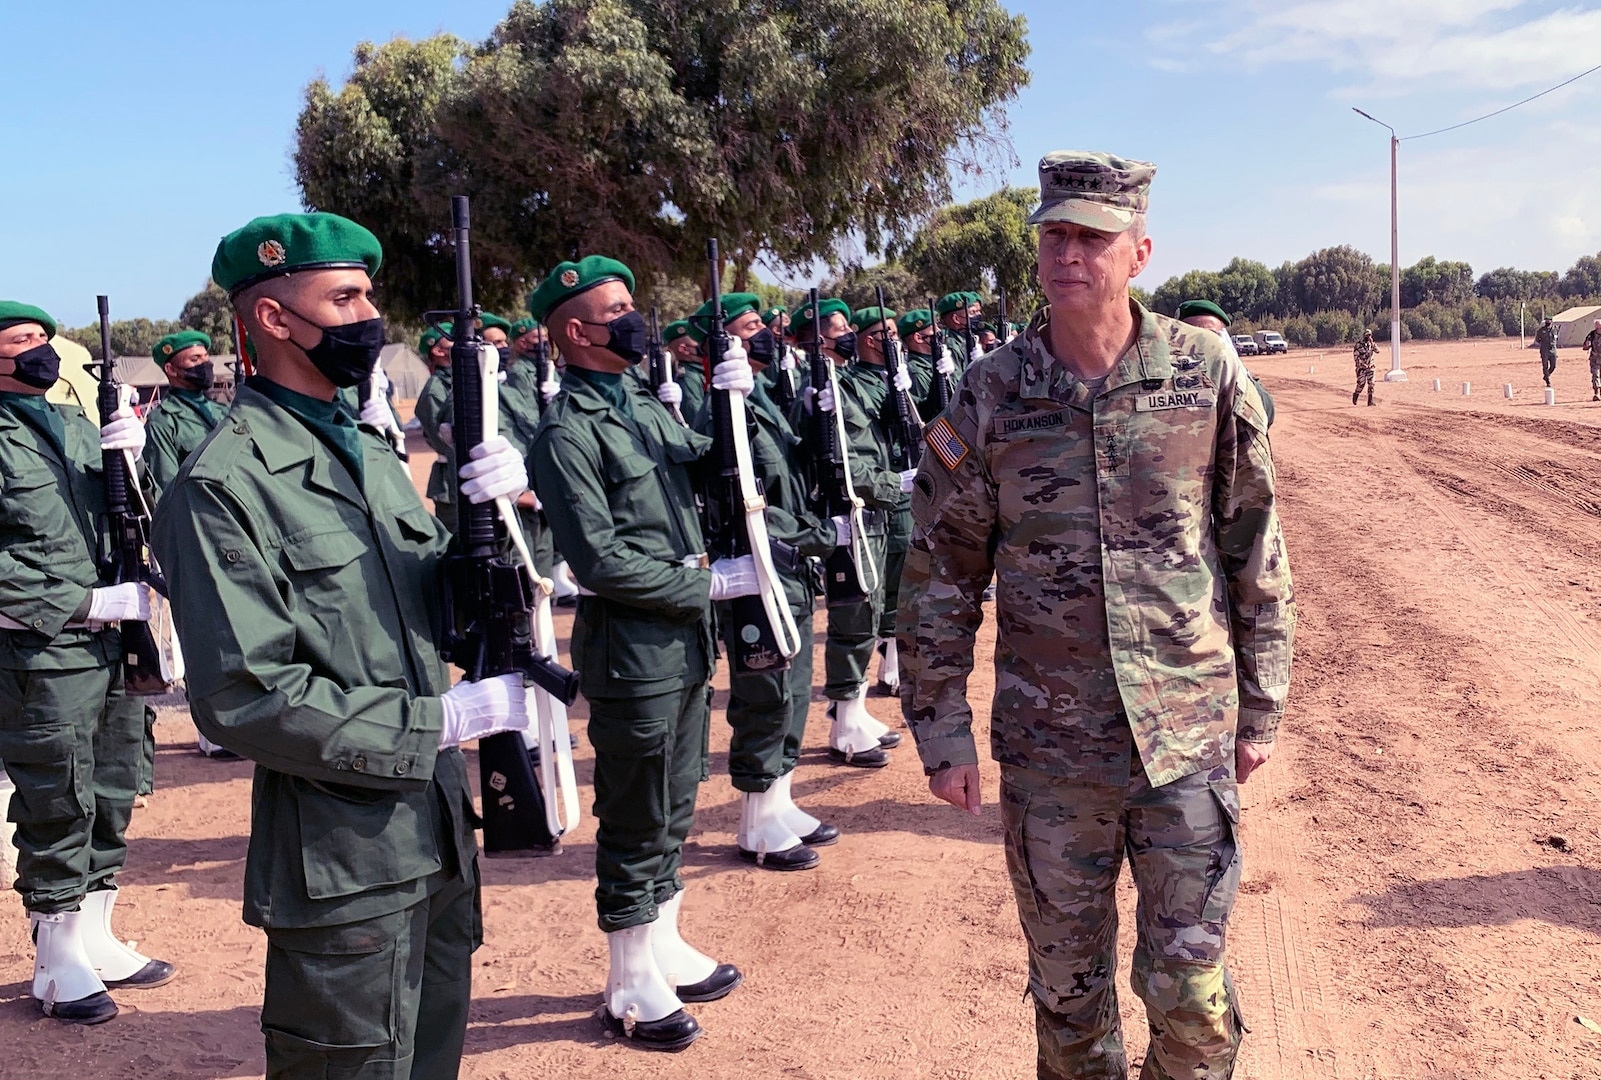 Army Gen. Daniel Hokanson, chief, National Guard Bureau, at Camp Tifnit Training Area, Morocco, June 17, 2021. This image was acquired with a cellular device.